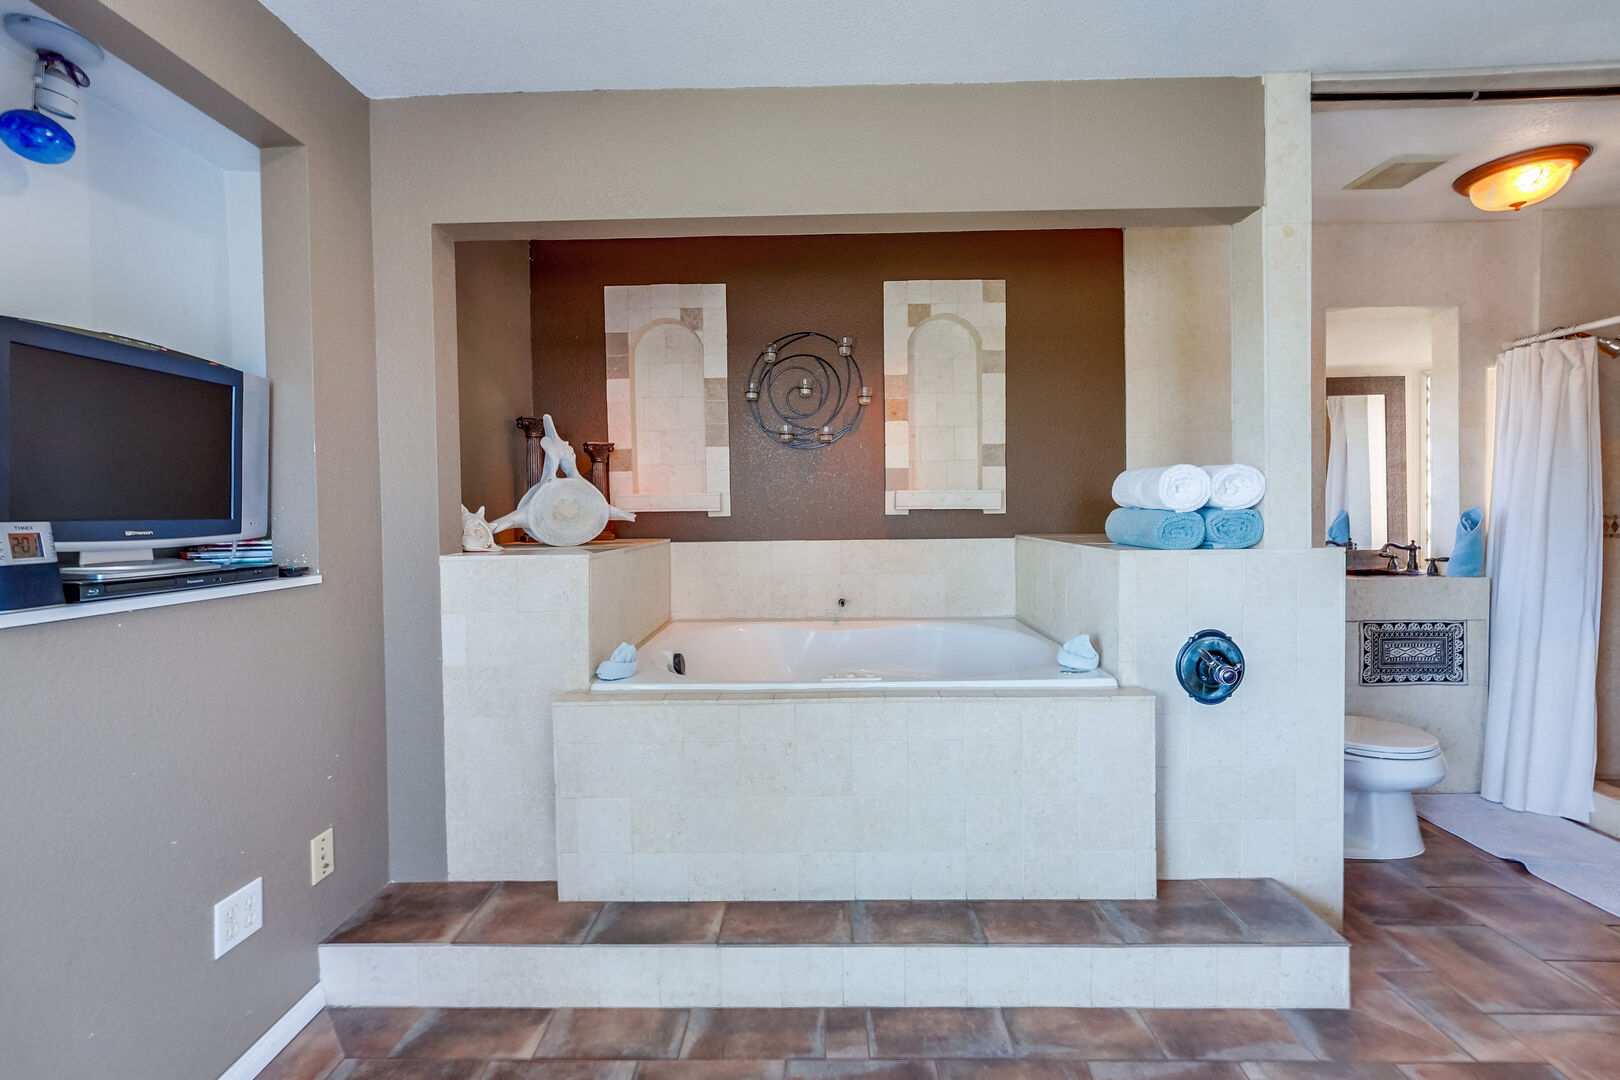 Master bedroom jacuzzi tub, separate toilet, separate vanity and separate shower. Please note: the bathroom amenities are not private, there is no dividing door. The bathroom is within the bedroom.